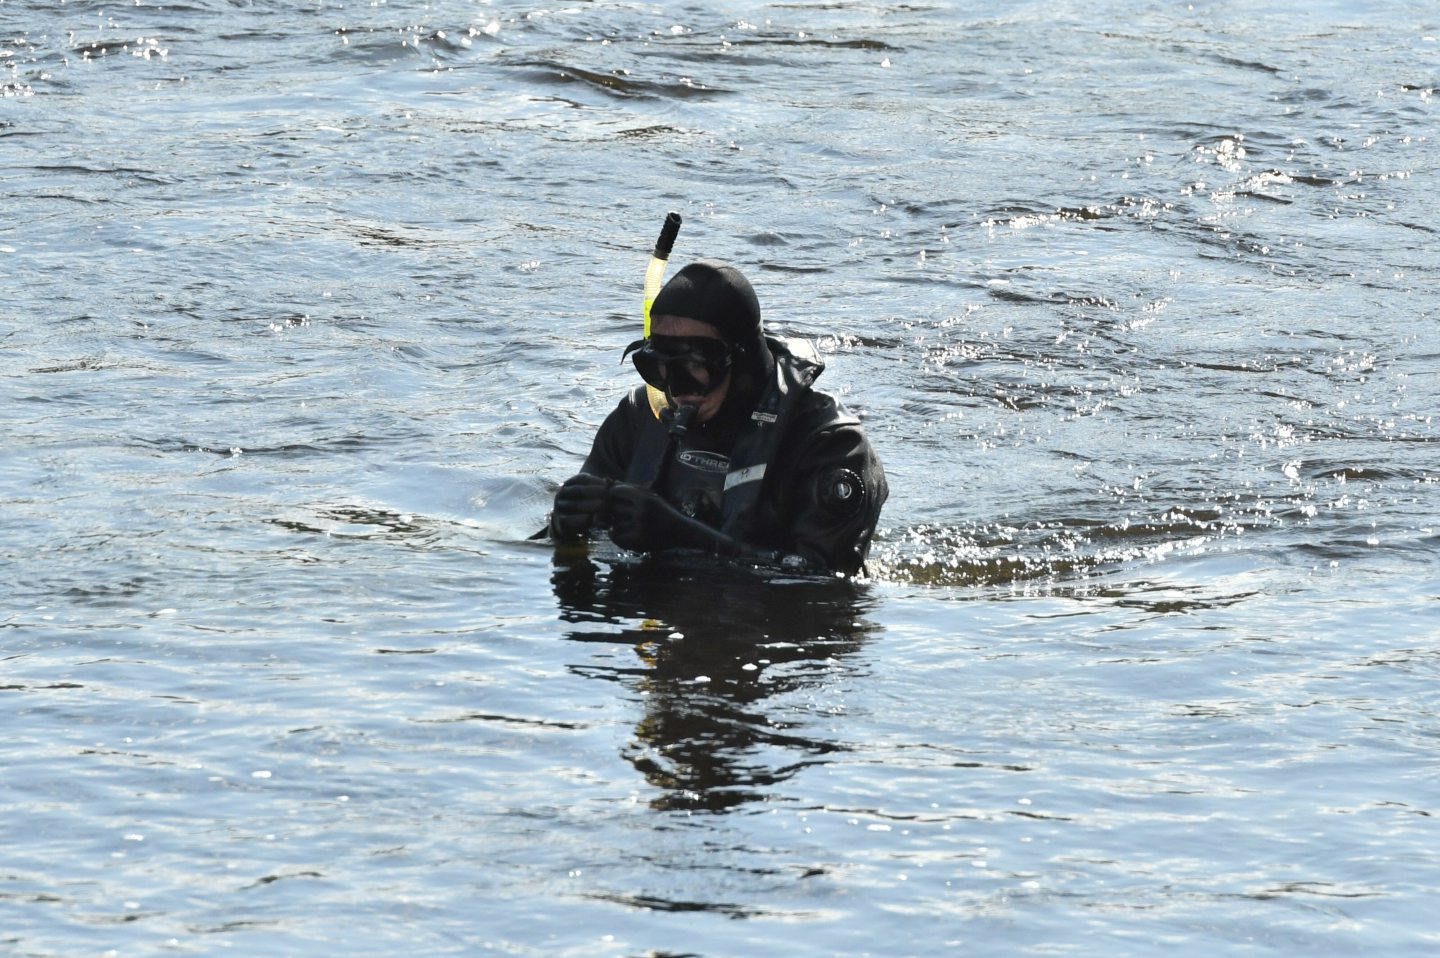 A diver in the Tay in Perth